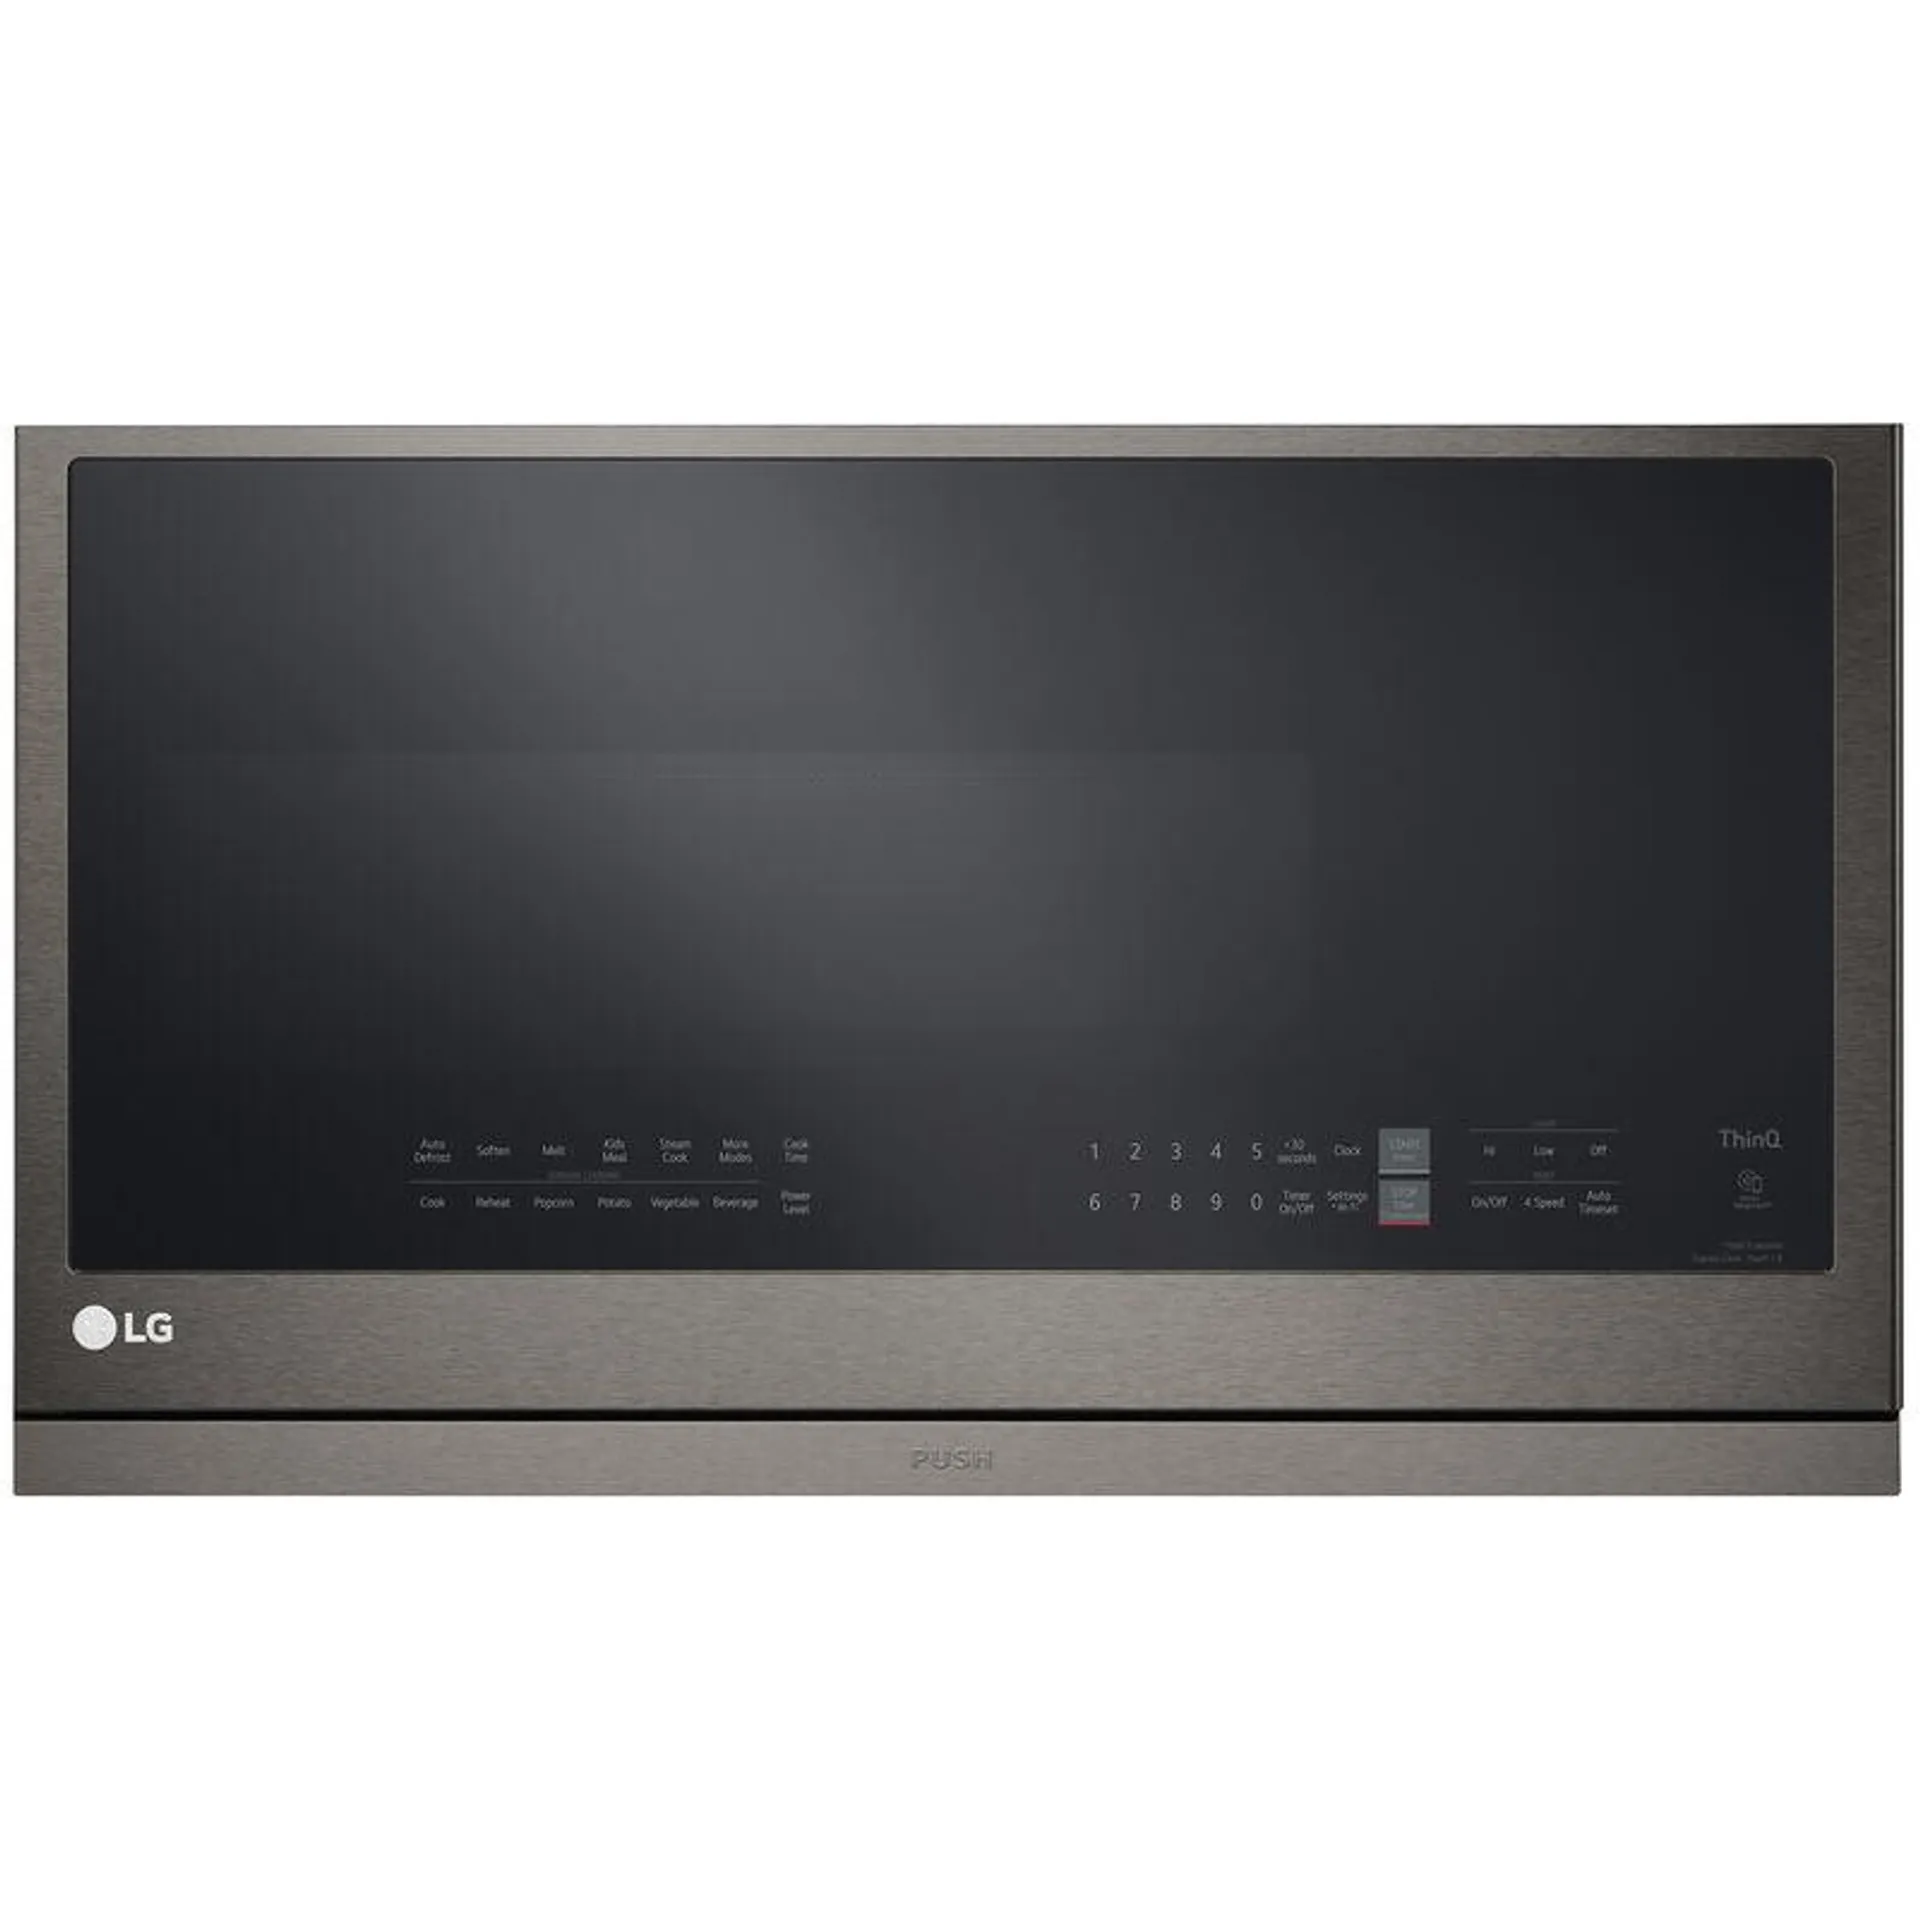 LG 30 in. 2.1 cu. ft. Over-the-Range Microwave with 10 Power Levels, 400 CFM & Sensor Cooking Controls - Print Proof Black Stainless Steel